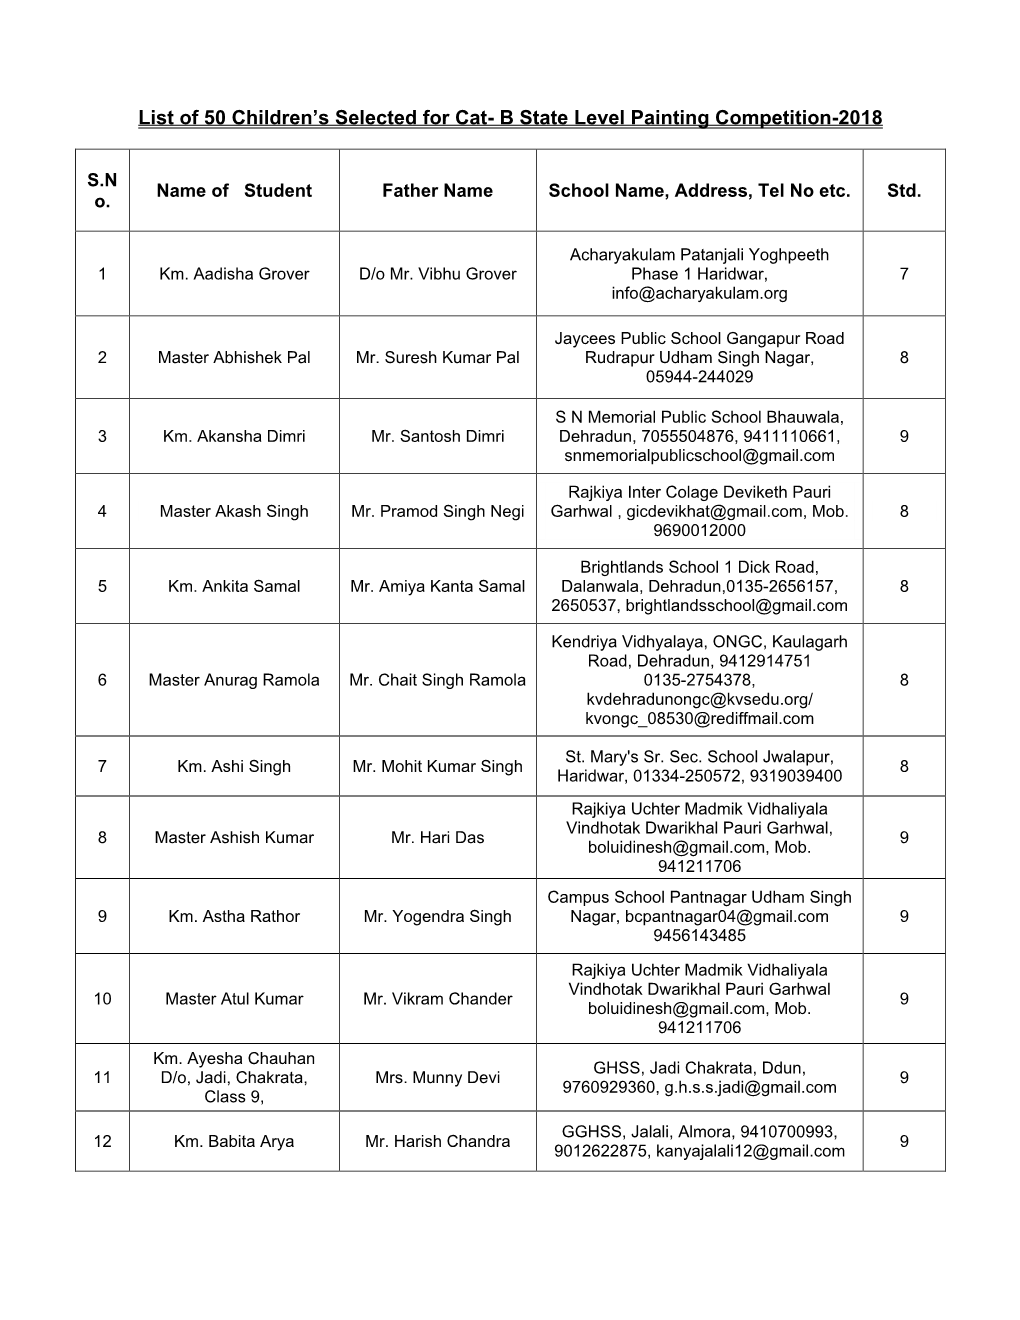 List of 50 Children's Selected for Cat- B State Level Painting Competition